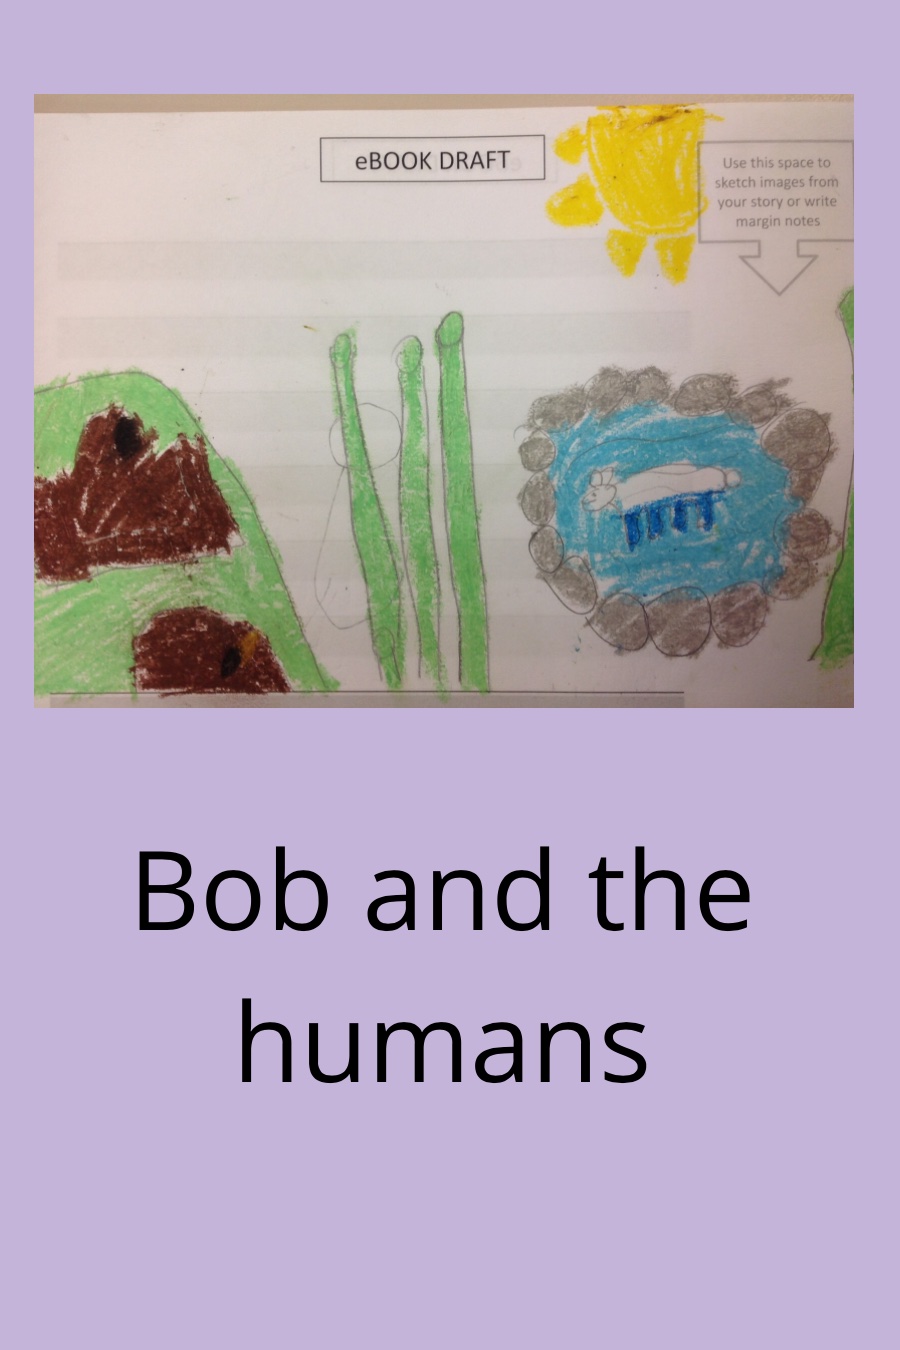 Bob and the Humans by Kayla S